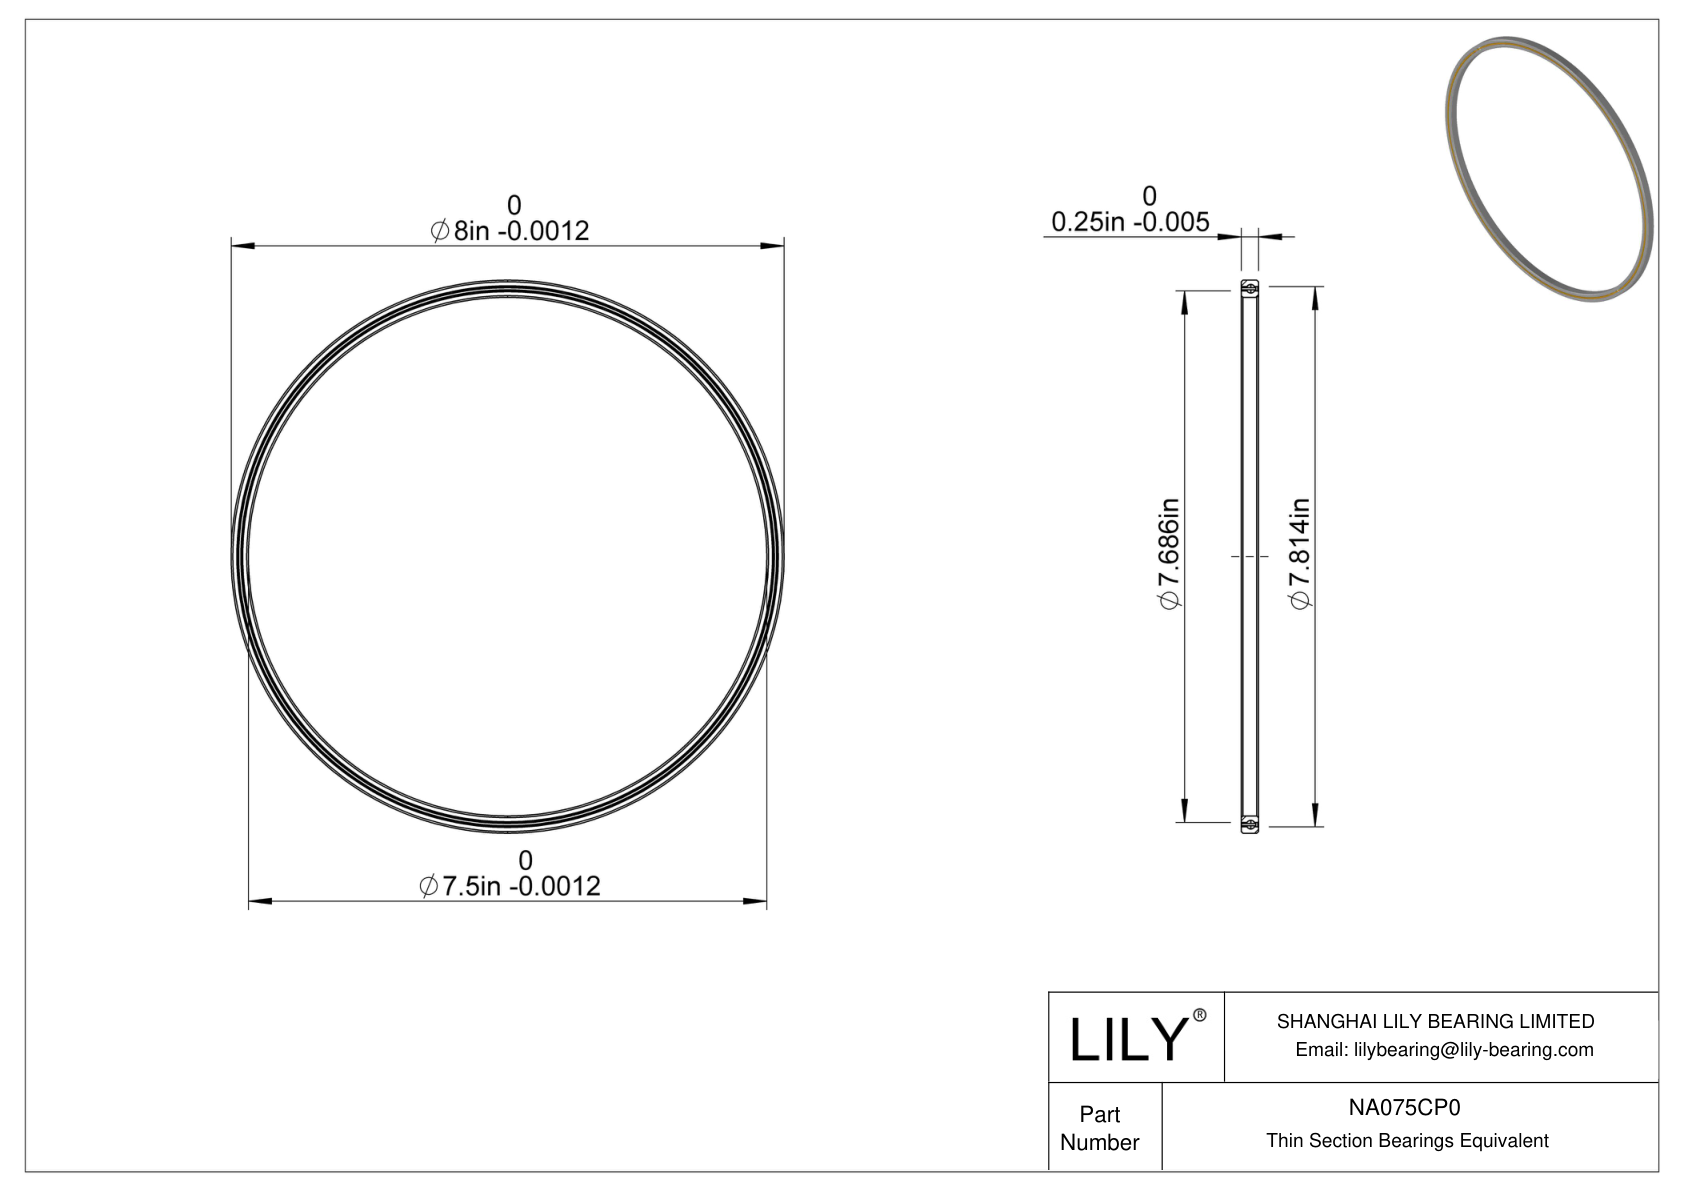 NA075CP0 Constant Section (CS) Bearings cad drawing